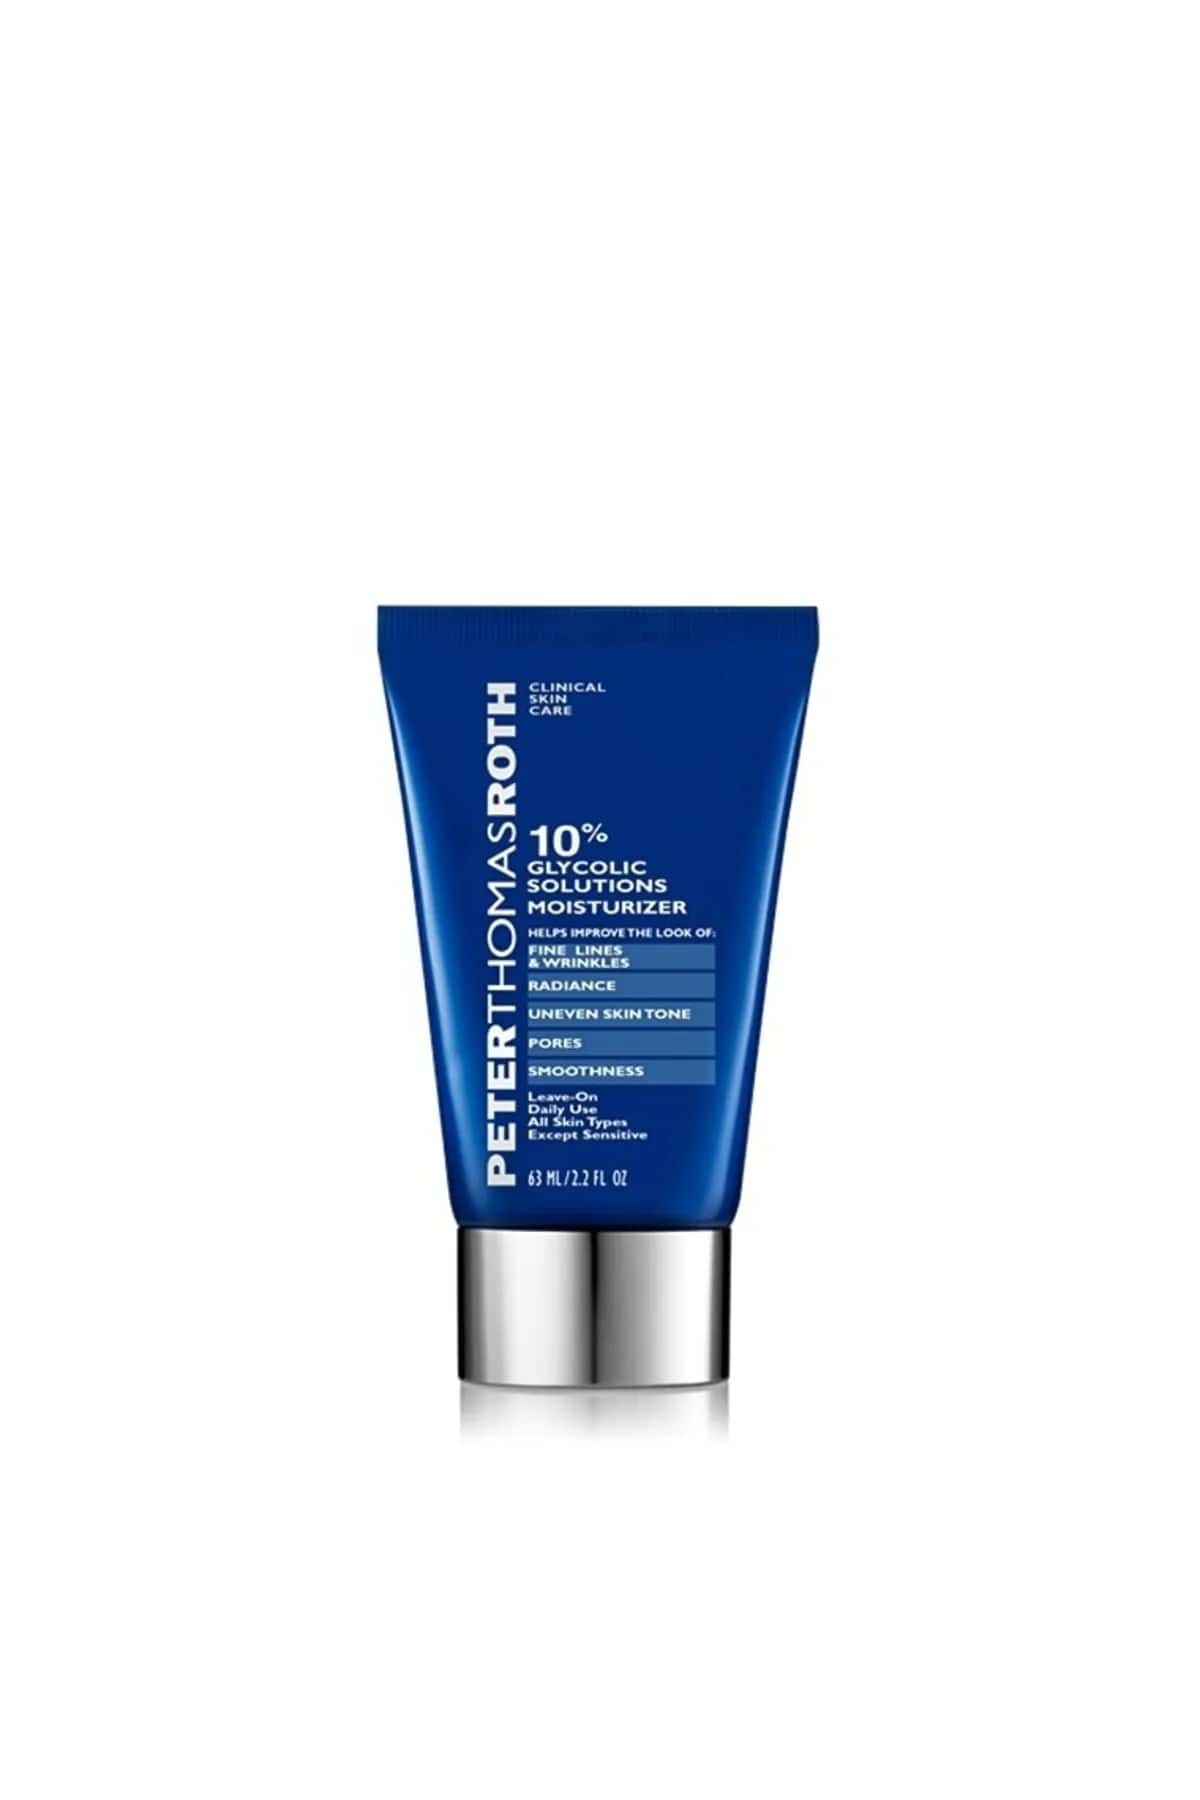 PETER THOMAS ROTH 10% Glycolic Solutions Moisturizer 63ml